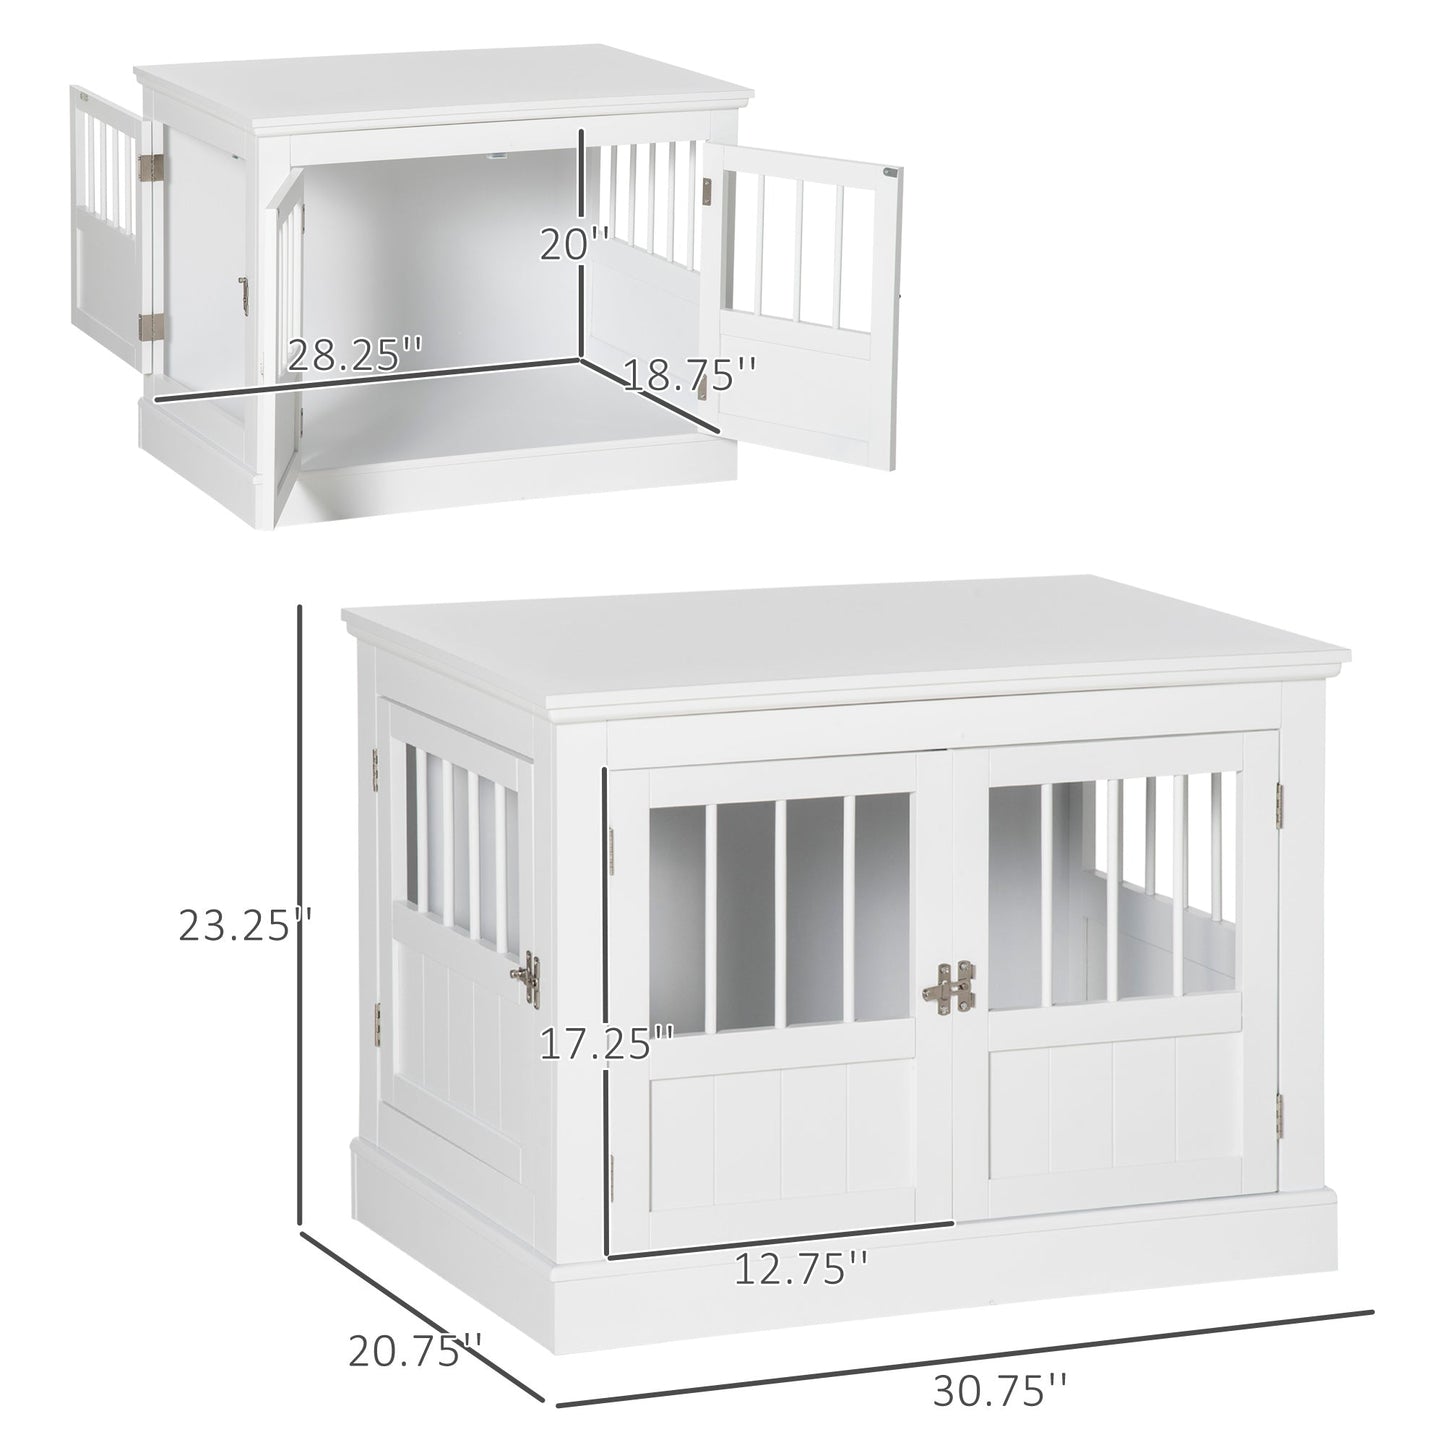 Pet Supplies-Dog Crate End Table with 3 Doors, Wooden Dog Crate Furniture, Indoor Puppy Kennel with Steel Tubes for Small Dogs, White - Outdoor Style Company